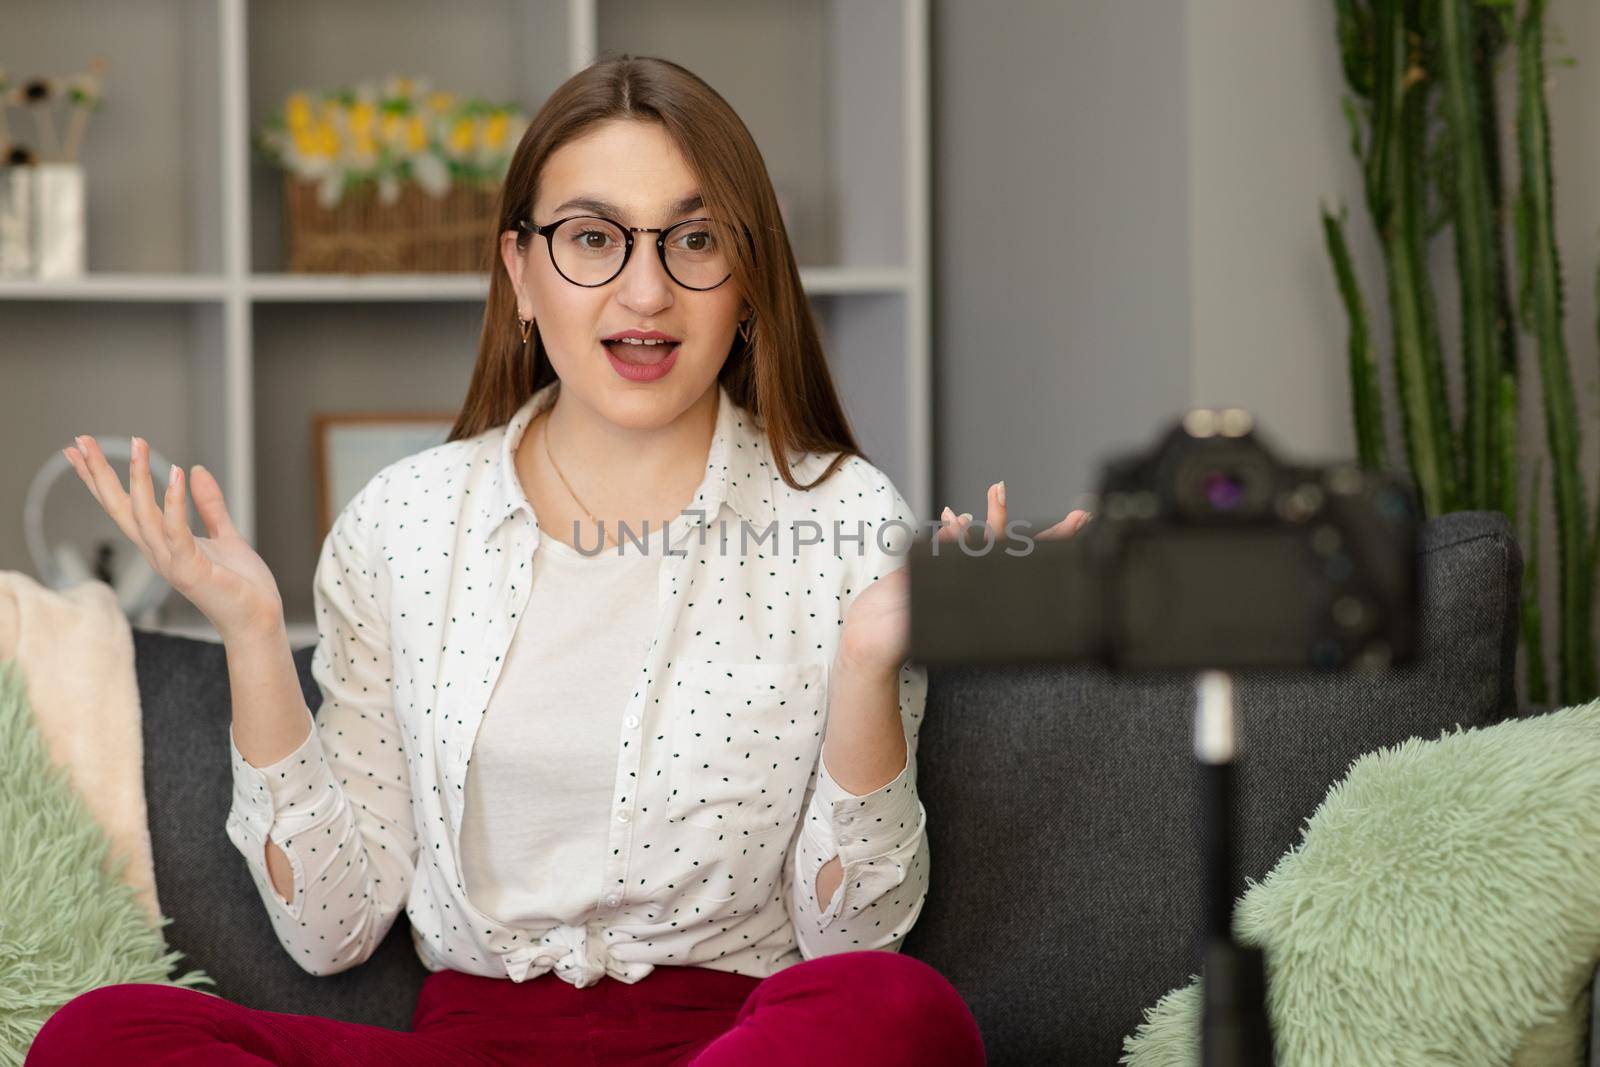 Happy girl at home talking in front of camera. People and technology, young woman at work as vlogger. Web influencer recording message for internet social networks by uflypro